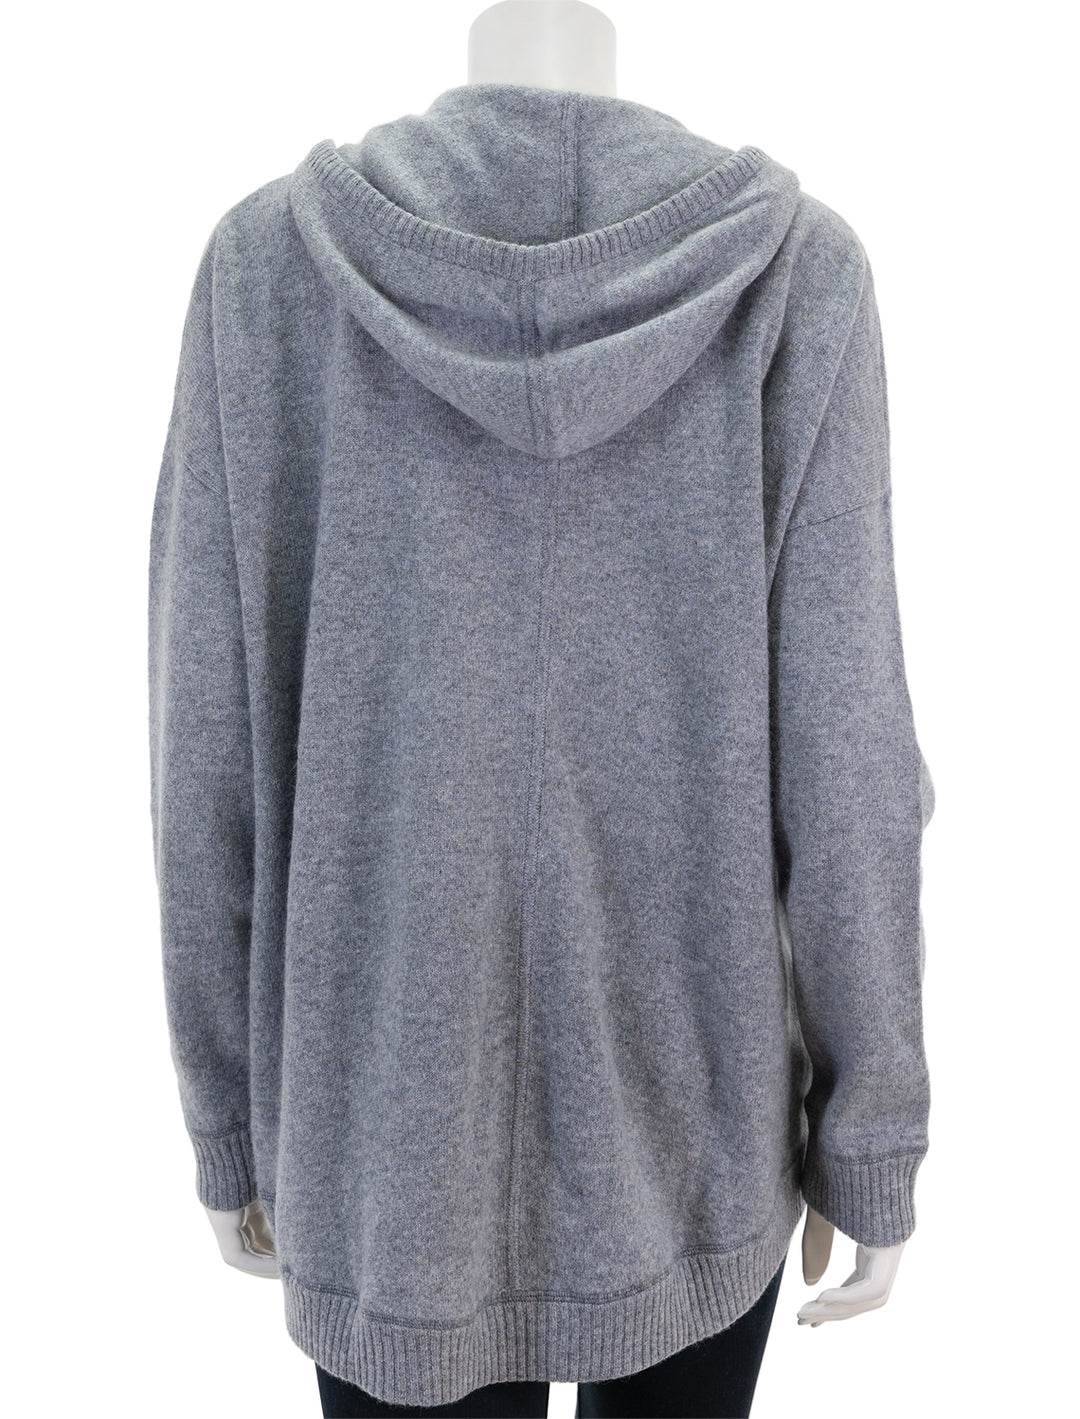 Back view of Minnie Rose's cashmere oversize zip hoodie in grey shadow.